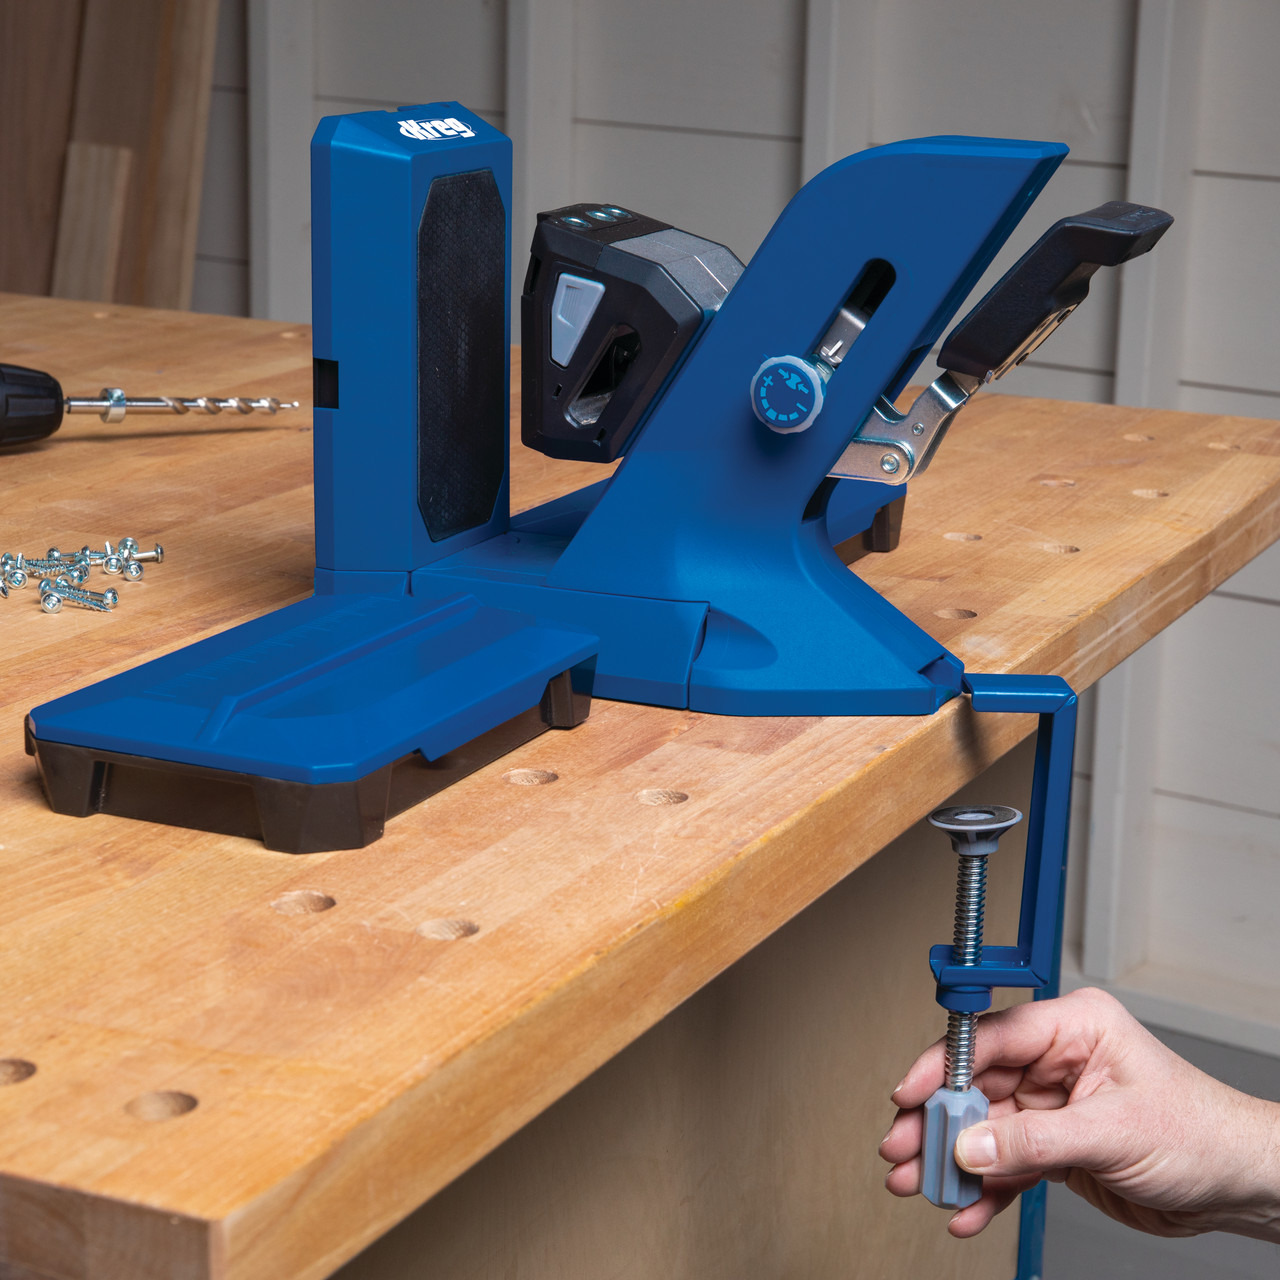 Kreg Pocket Hole Jig Kit - Portable Woodworking Jig for Strong and